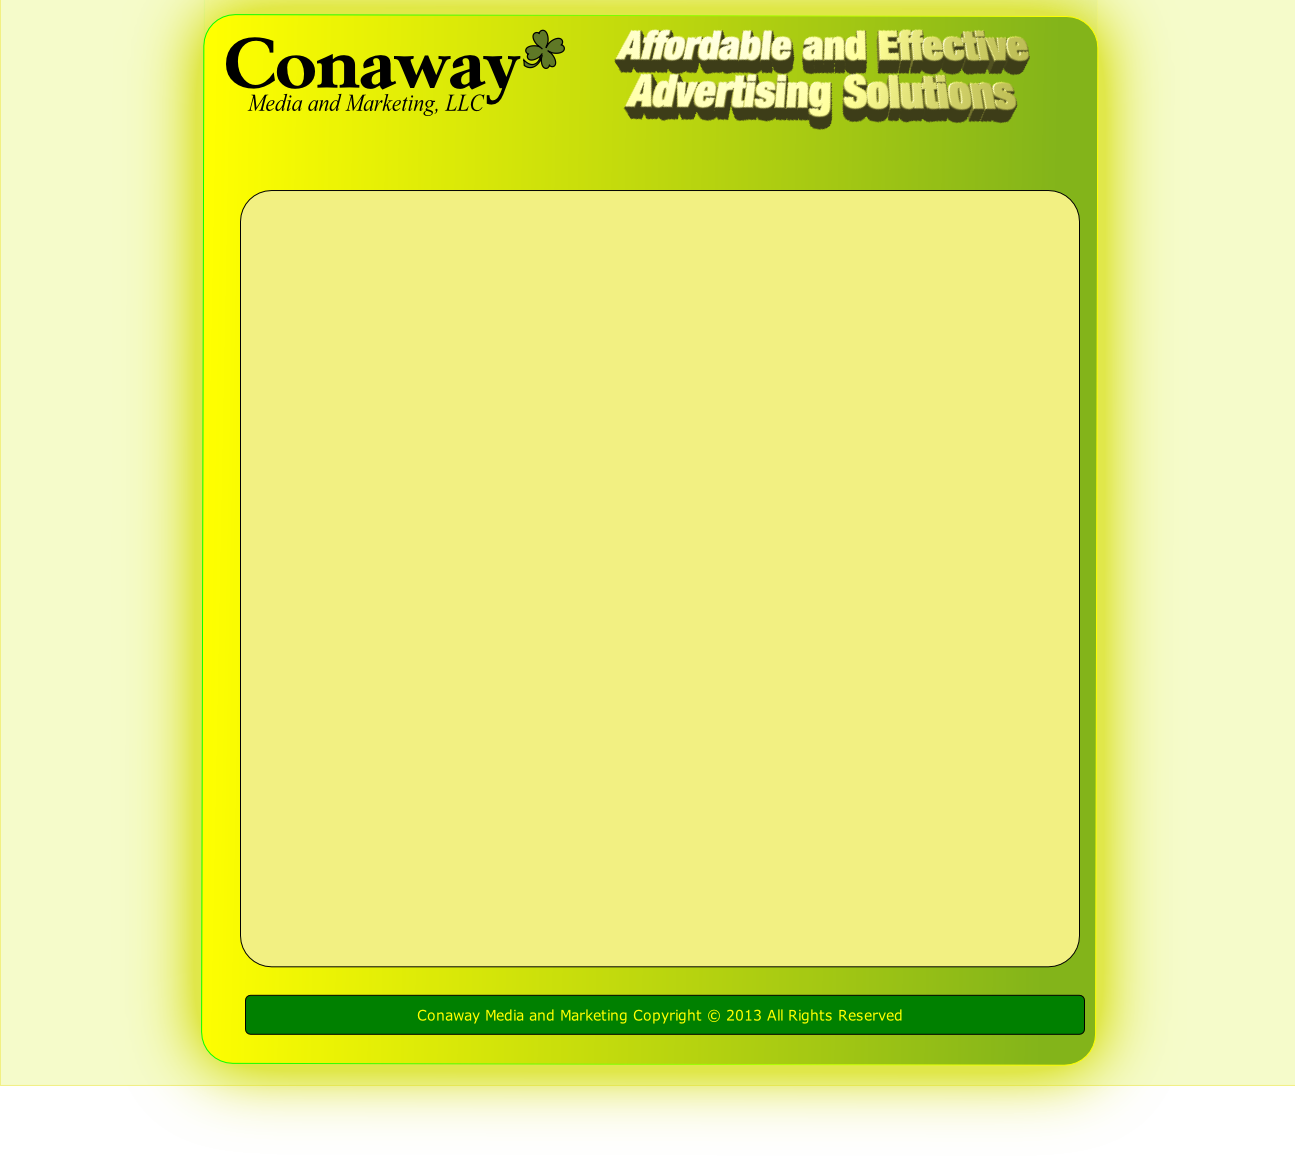 Conaway Media and Marketing Copyright © 2013 All Rights Reserved